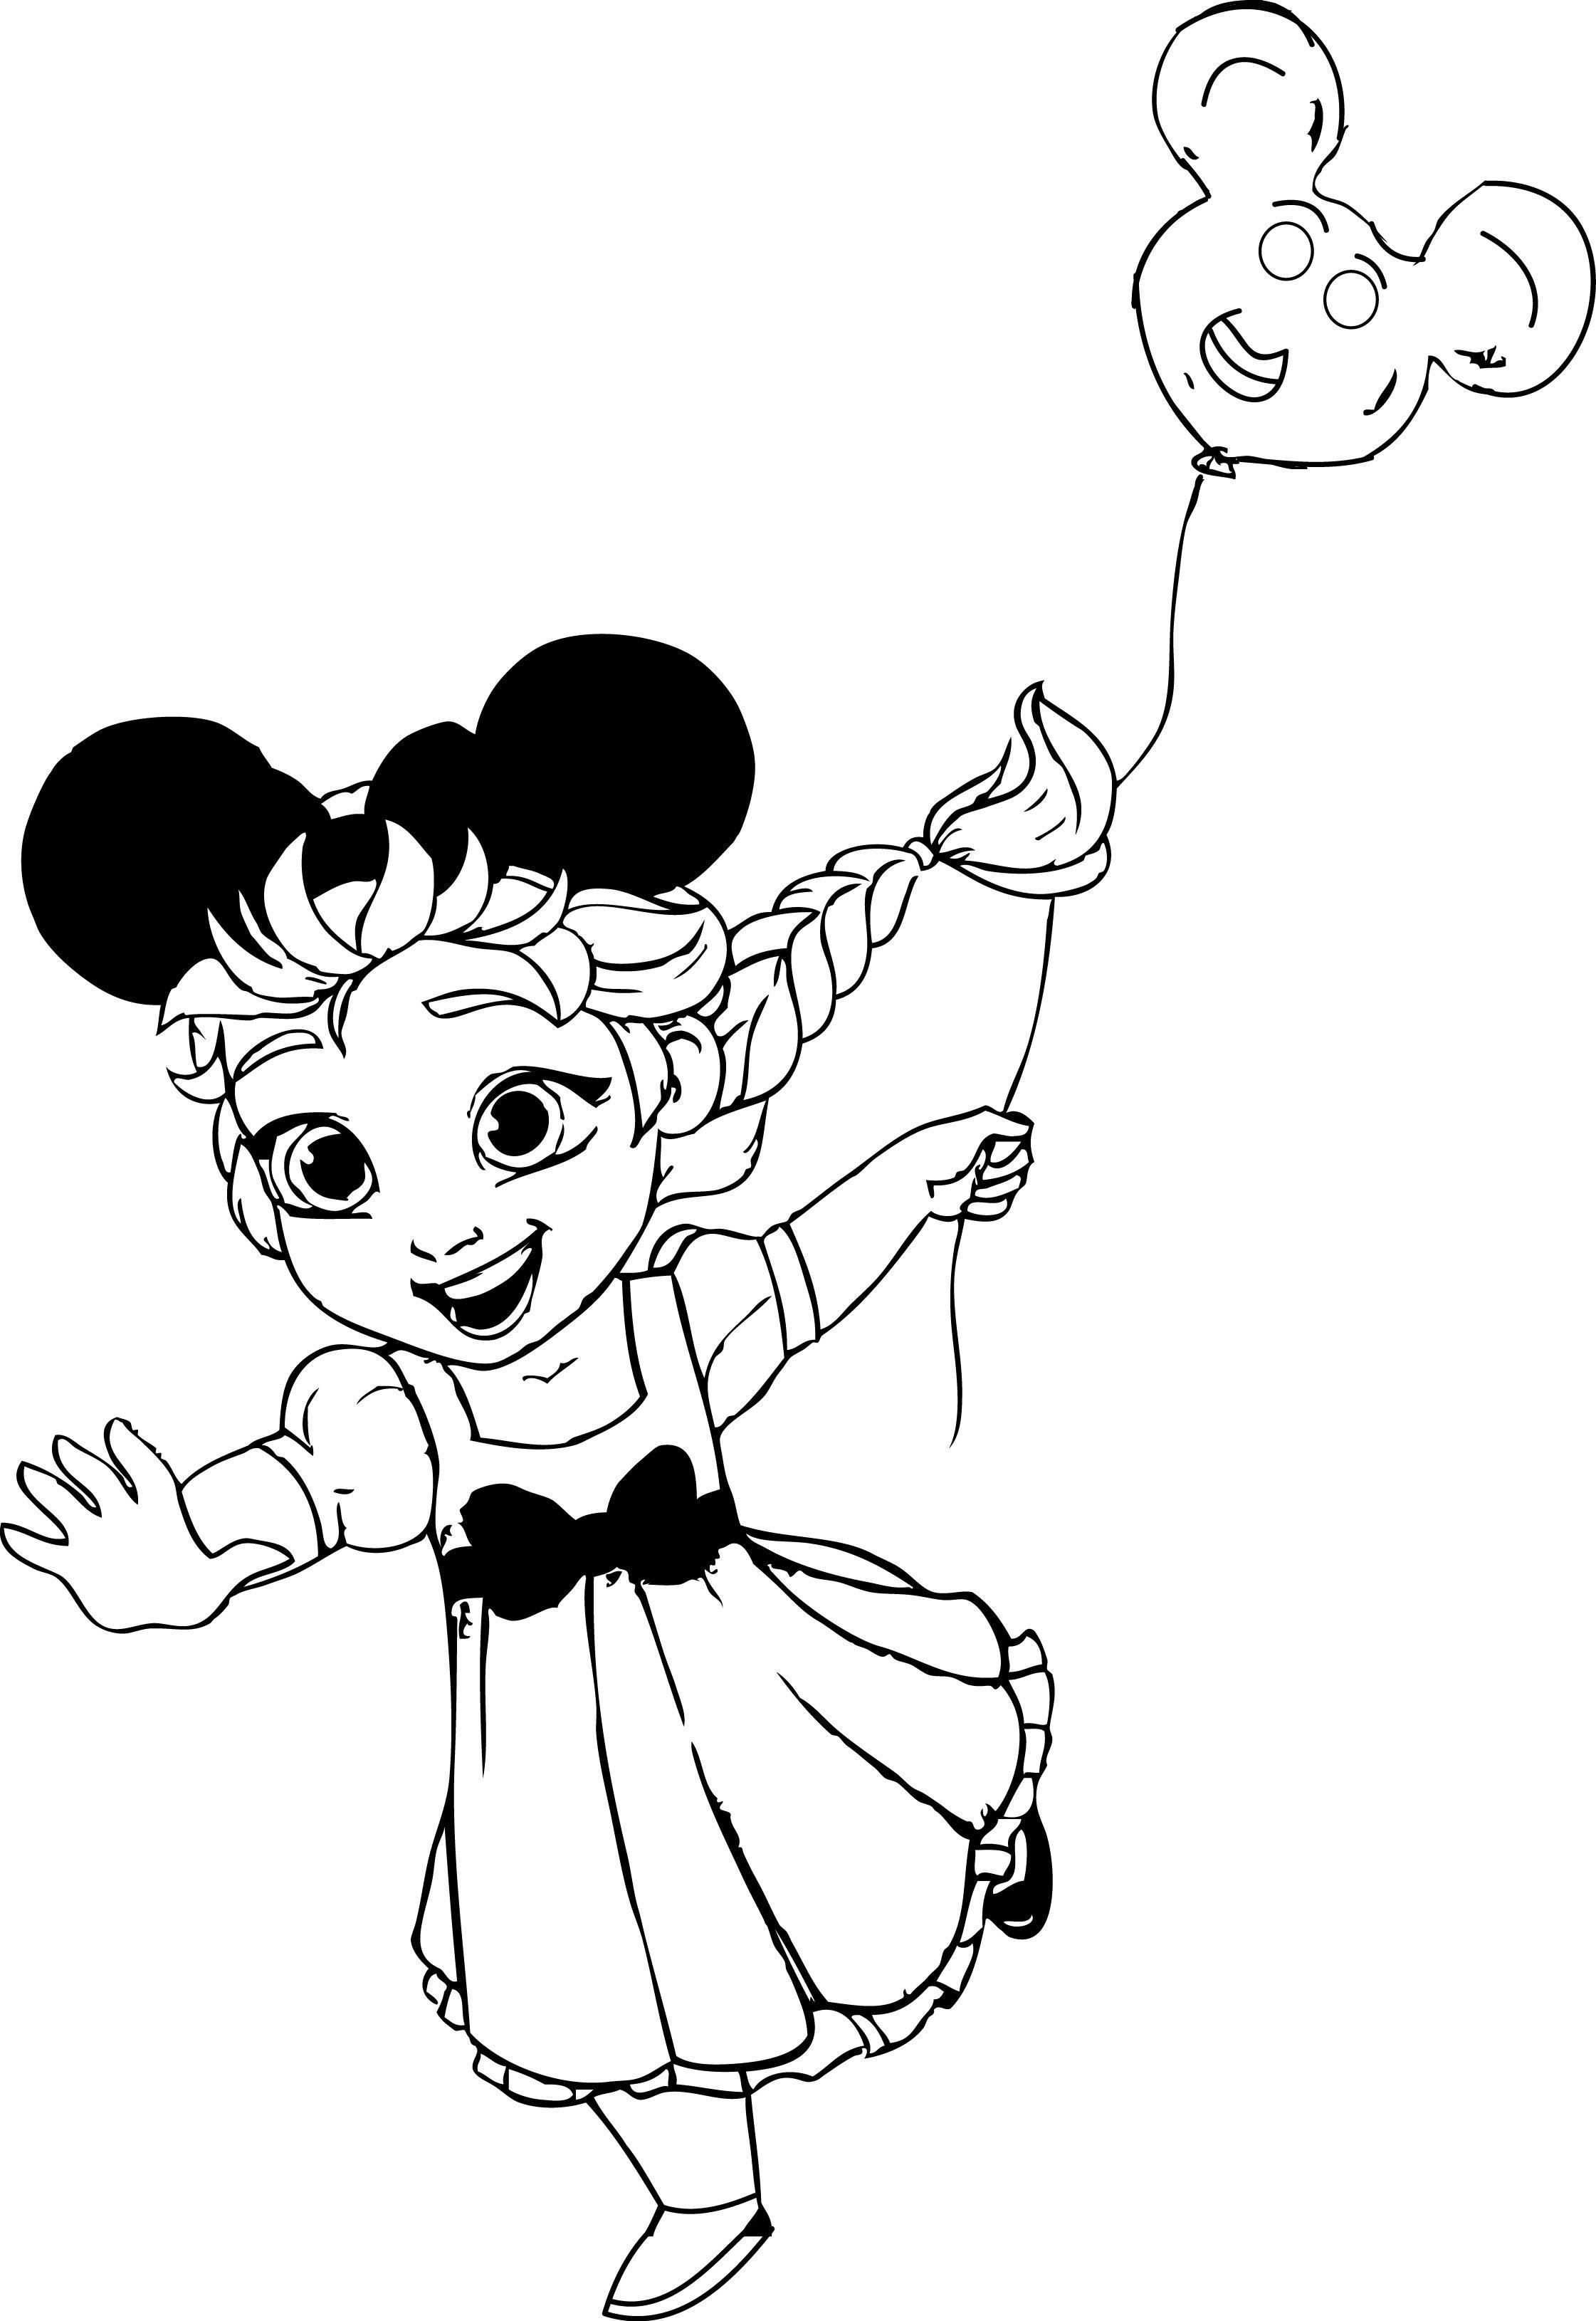 Baby Elsa Coloring Pages at GetColorings.com | Free printable colorings